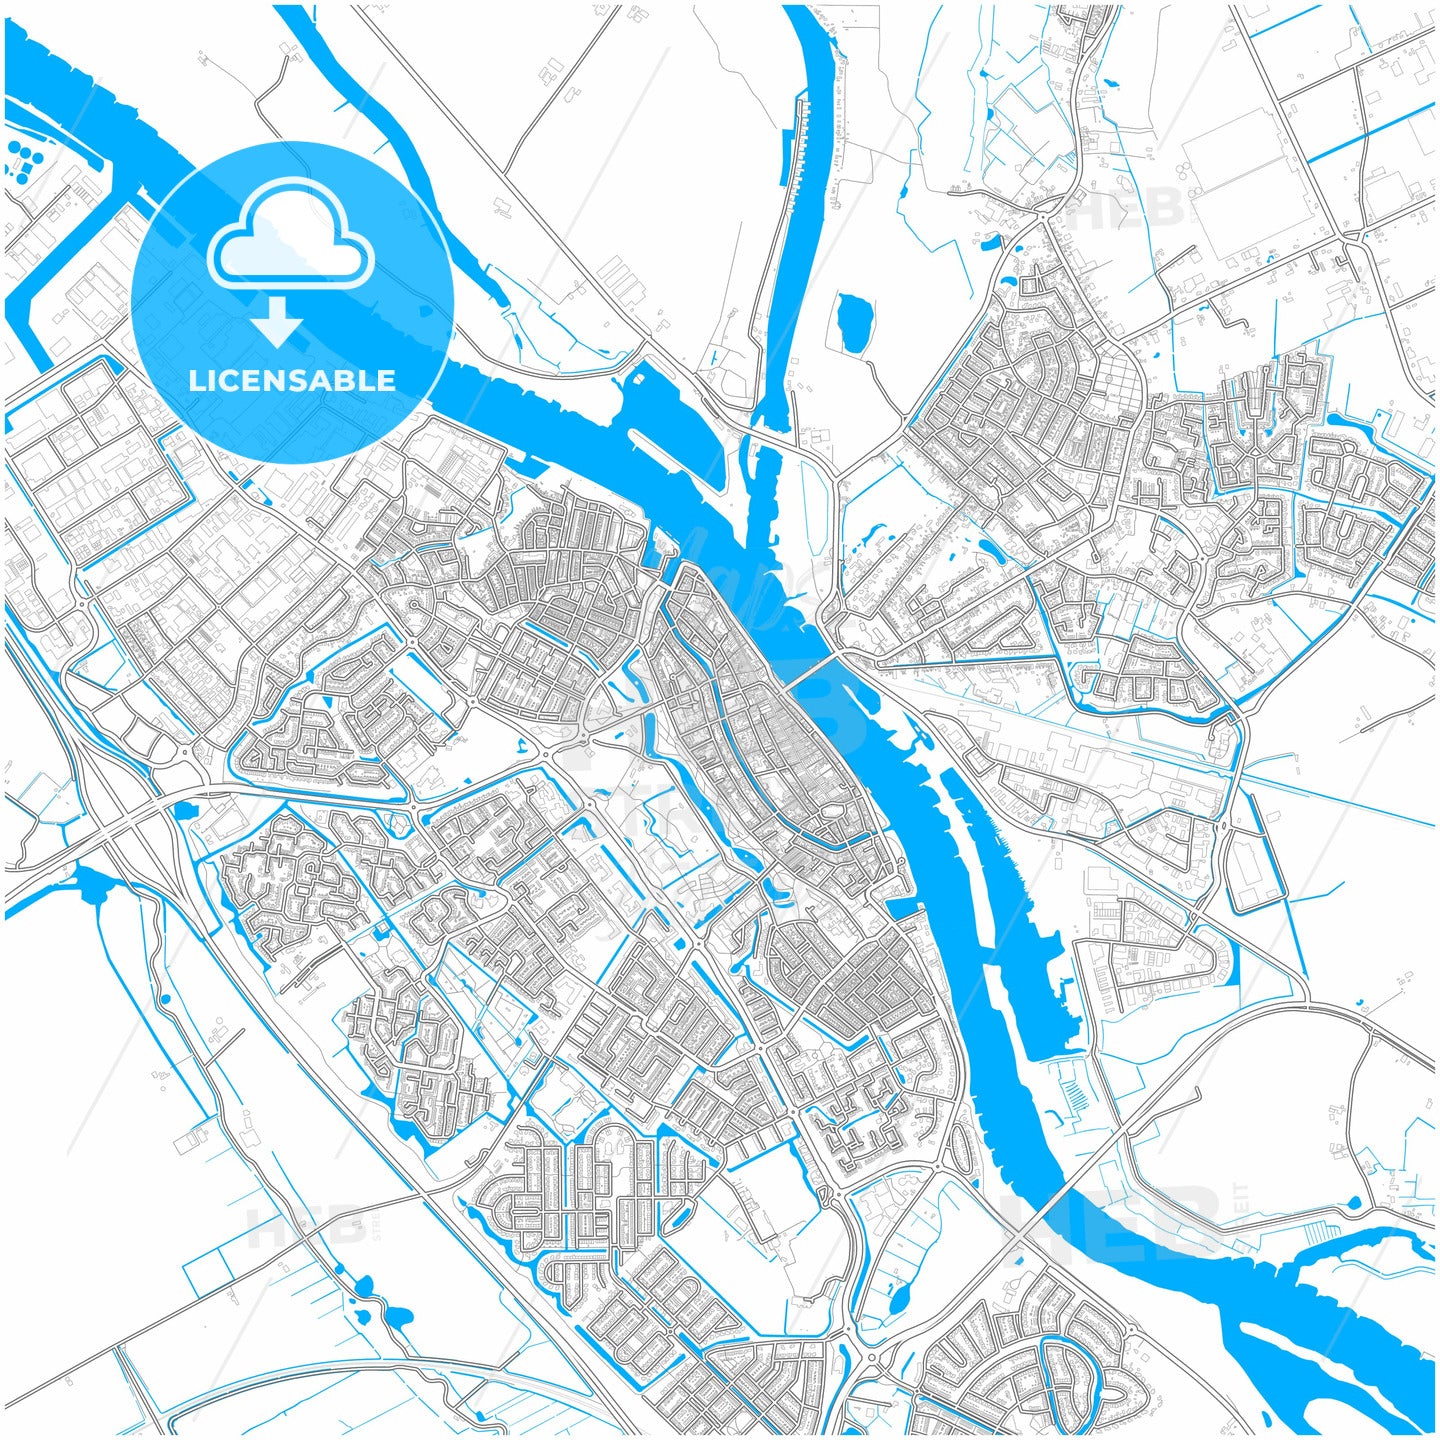 Kampen, Overijssel, Netherlands, city map with high quality roads.